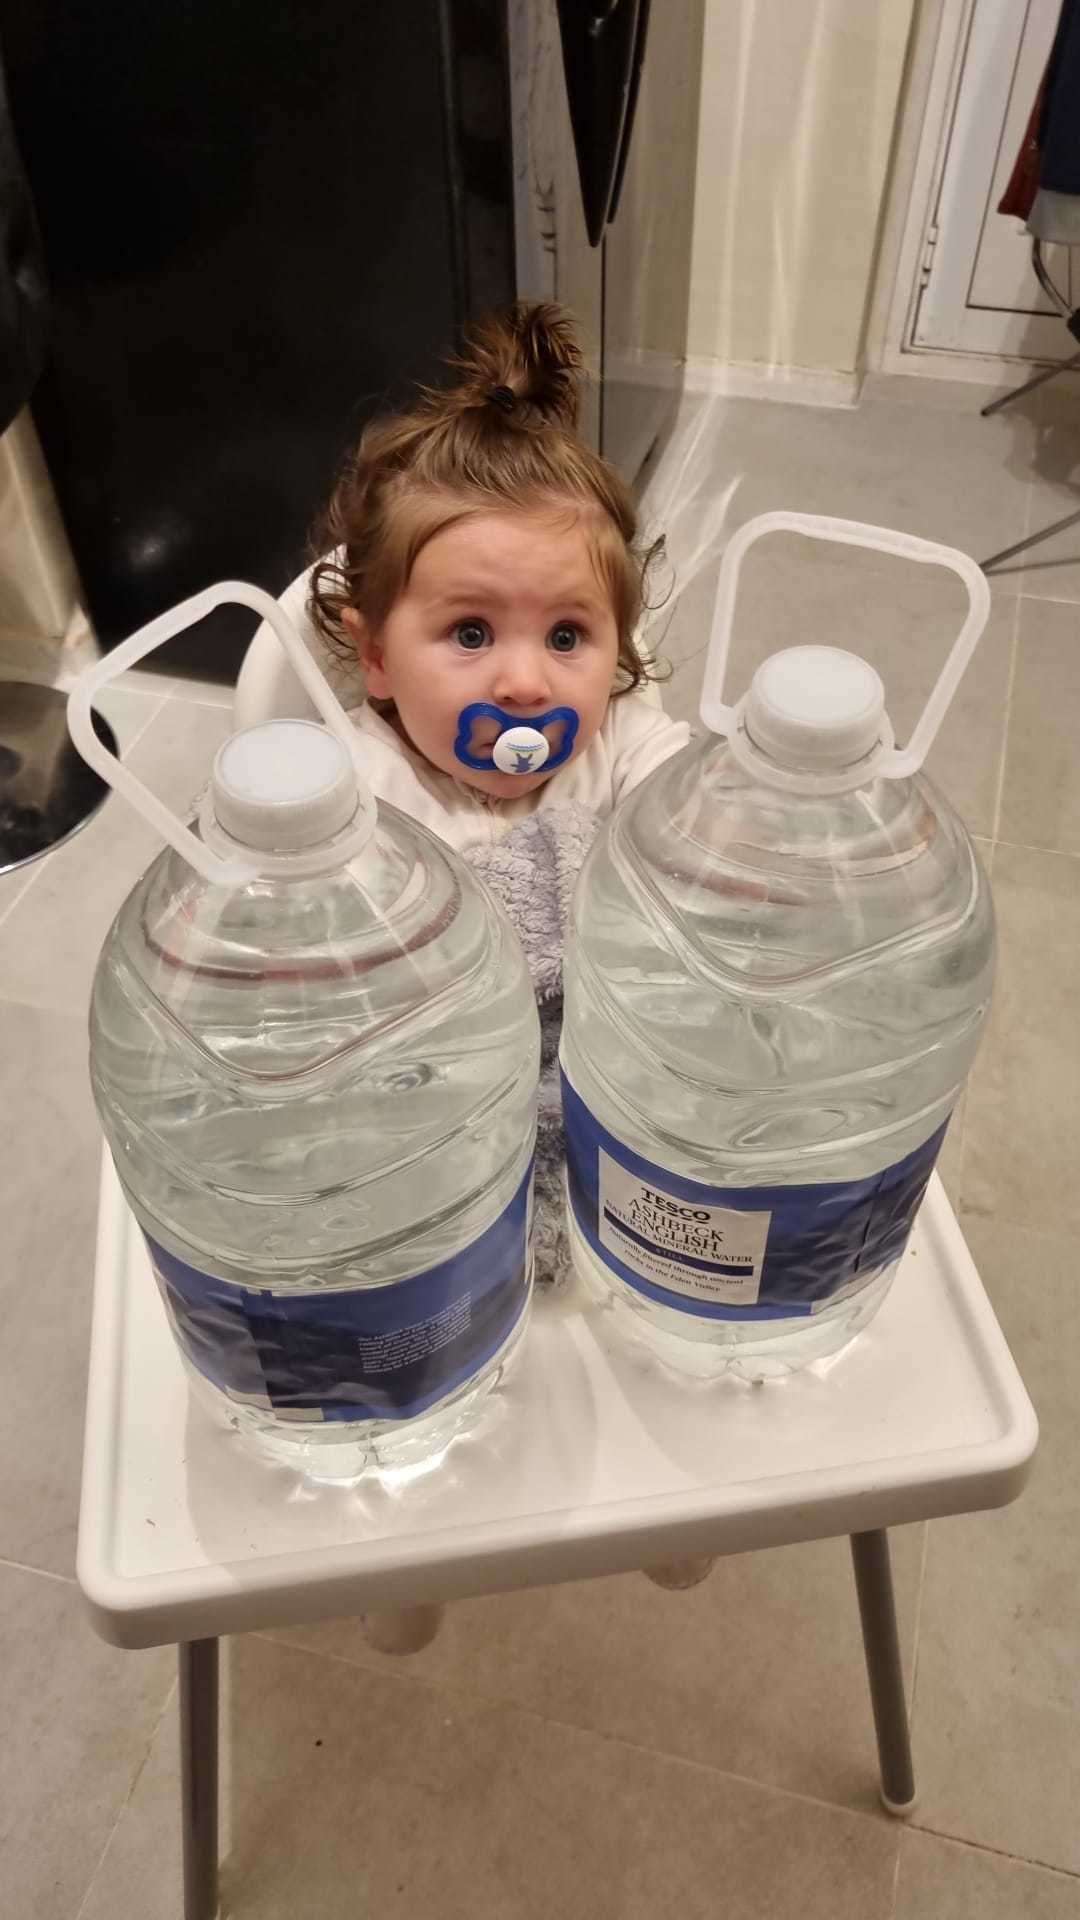 The family had to rush to supermarkets to get water to be able to look after baby Oliver. Picture: Grace Ockwell